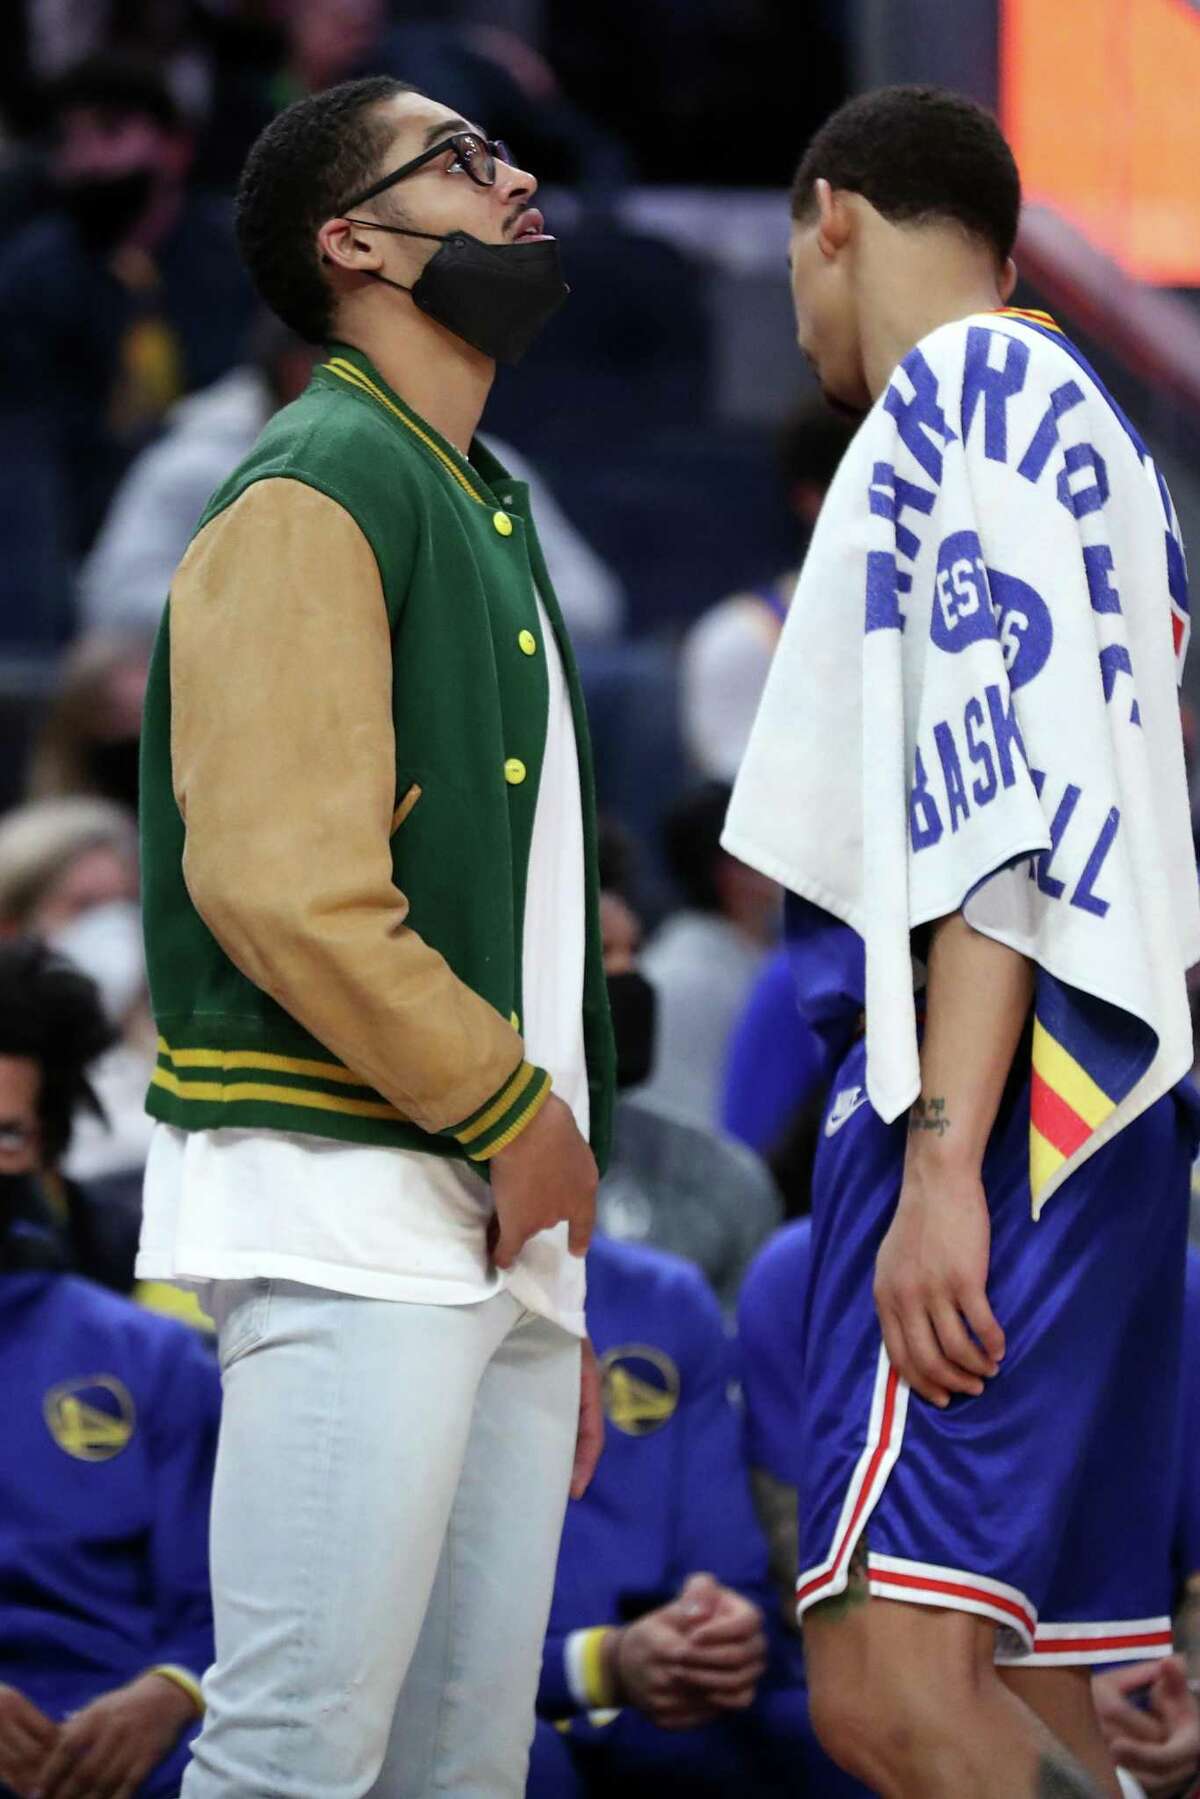 Golden State Warriors' Jordan Poole watches a replay in 4th quarter of Denver Nuggets' 89-86 win in NBA game at Chase Center in San Francisco, Calif., on Tuesday, December 28, 2021.